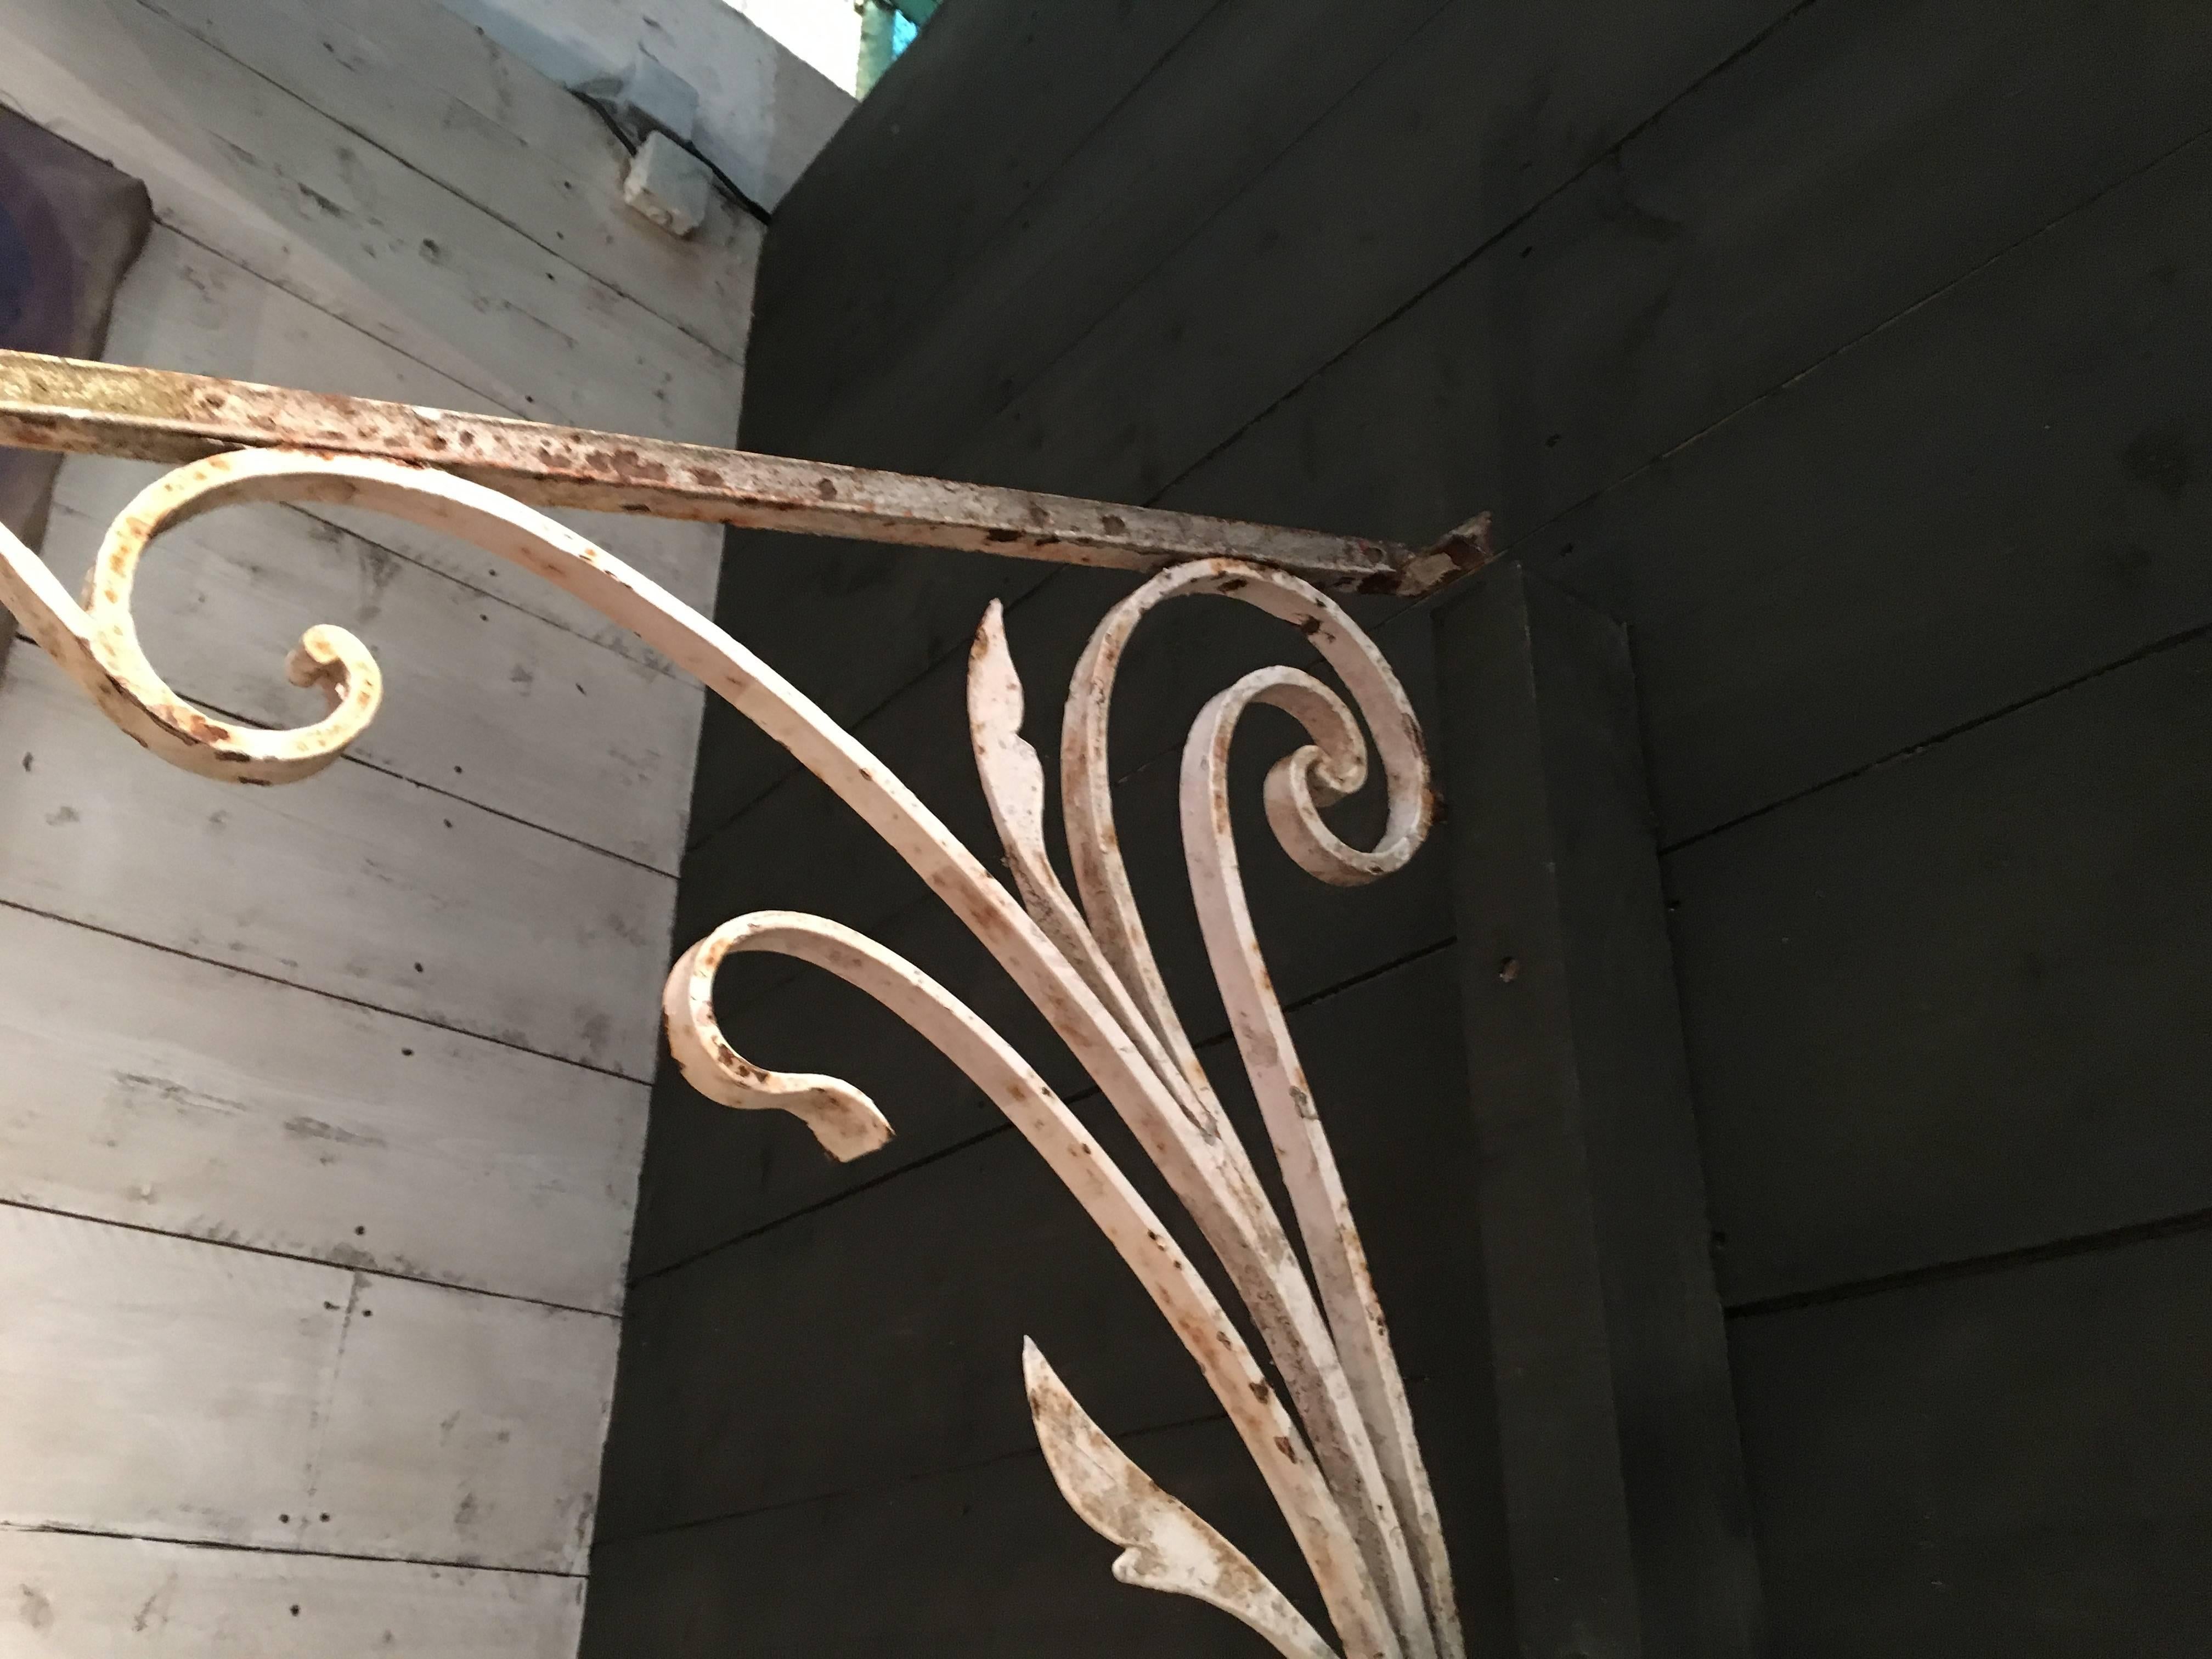 Hand-Crafted French Art Nouveau Wrought Iron Marquis or Arbor